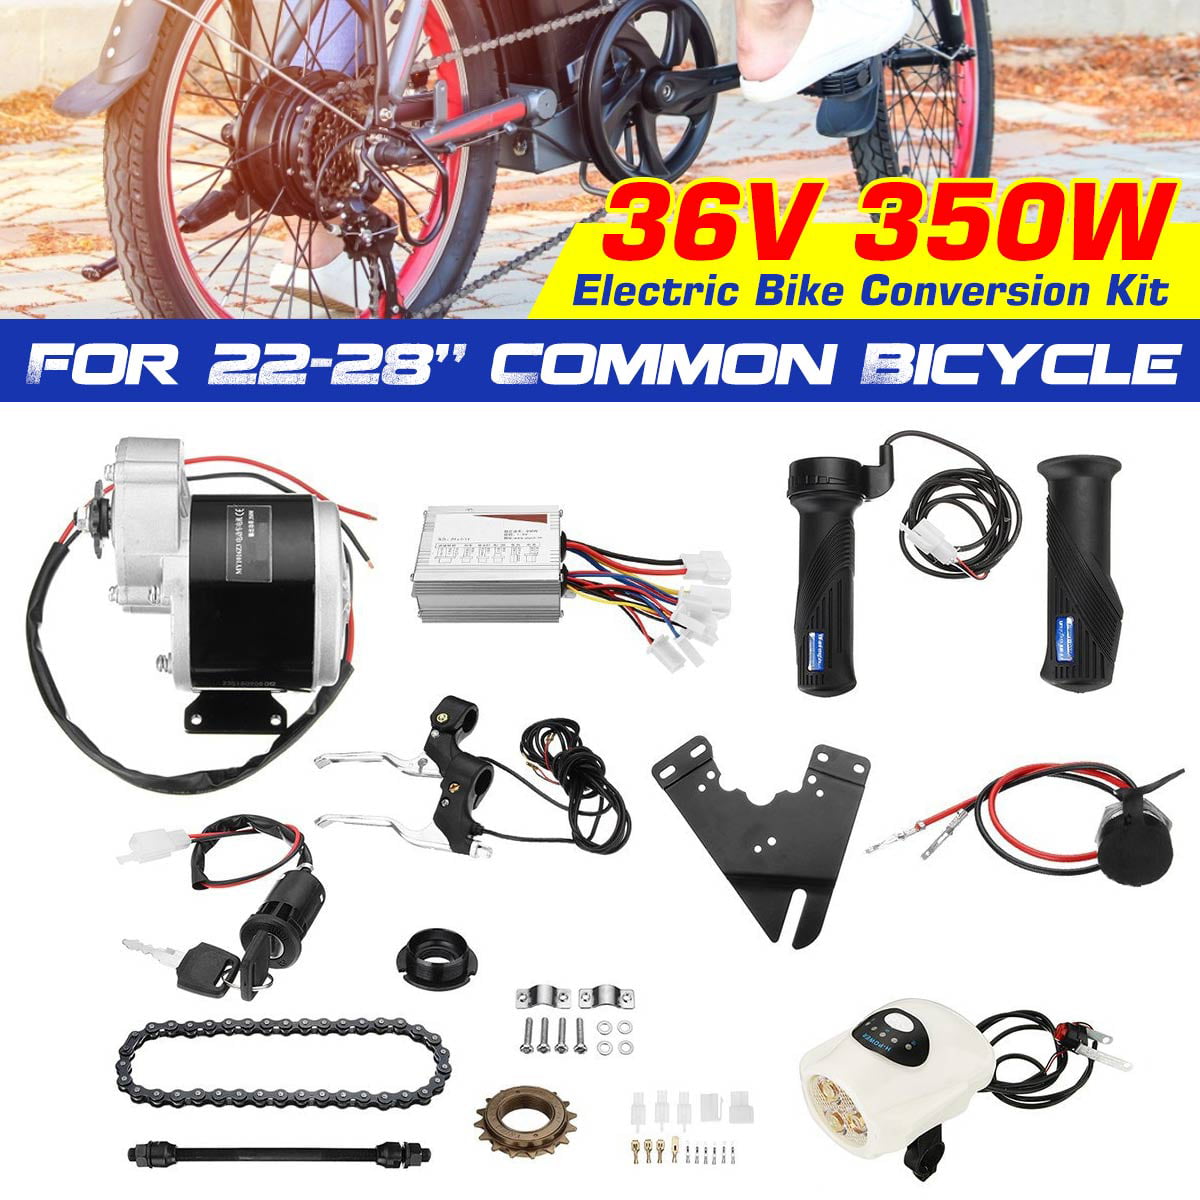 Dc 24V 250W Electric Bicklcle Motor Conversion Kit for 20"-28" Electric Bike,USA 